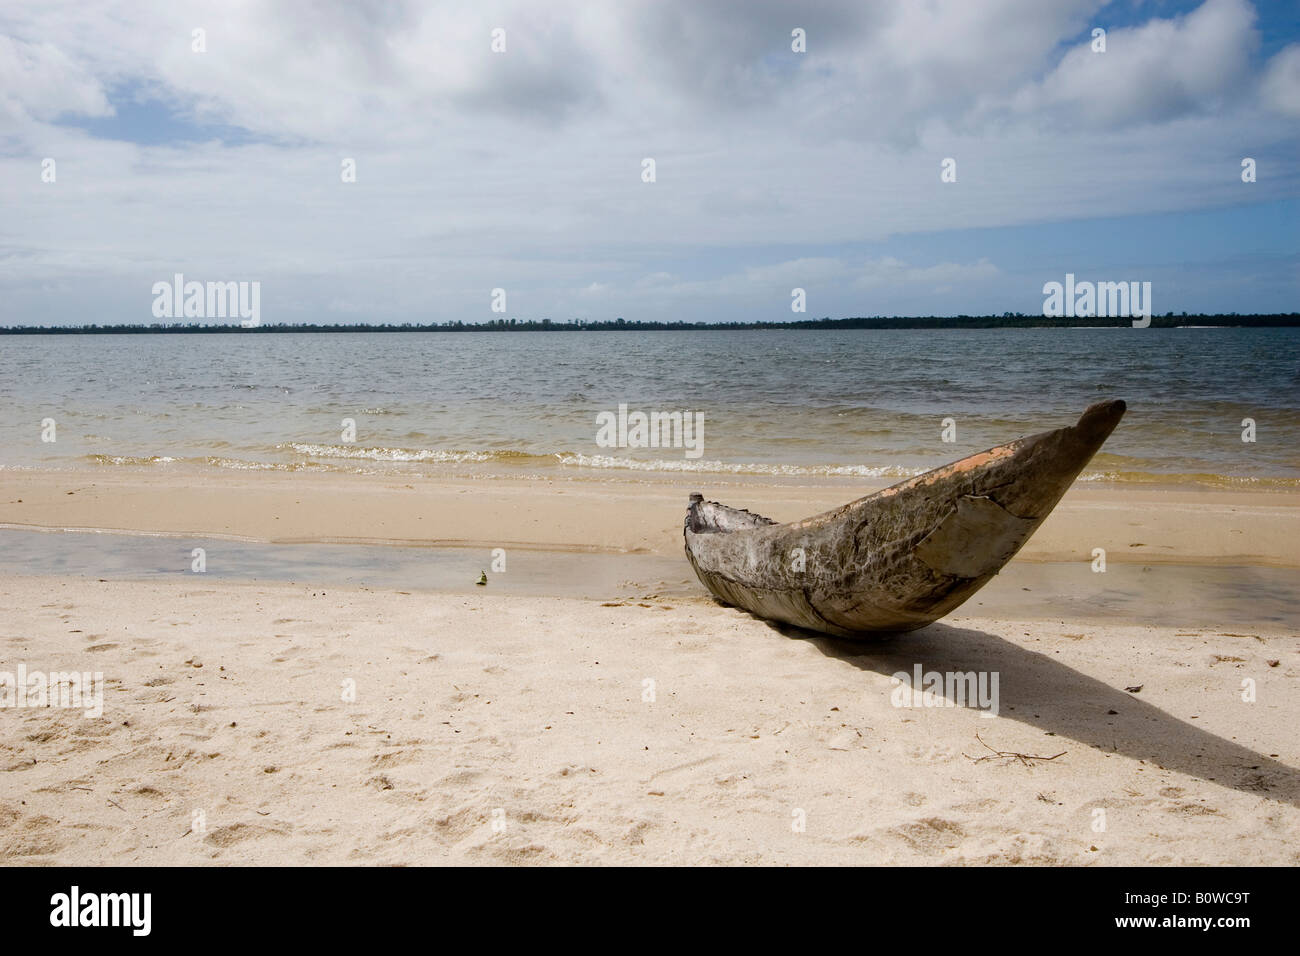 Logboat or dugout boat on a beach in Manambato, Madagascar, Africa Stock Photo